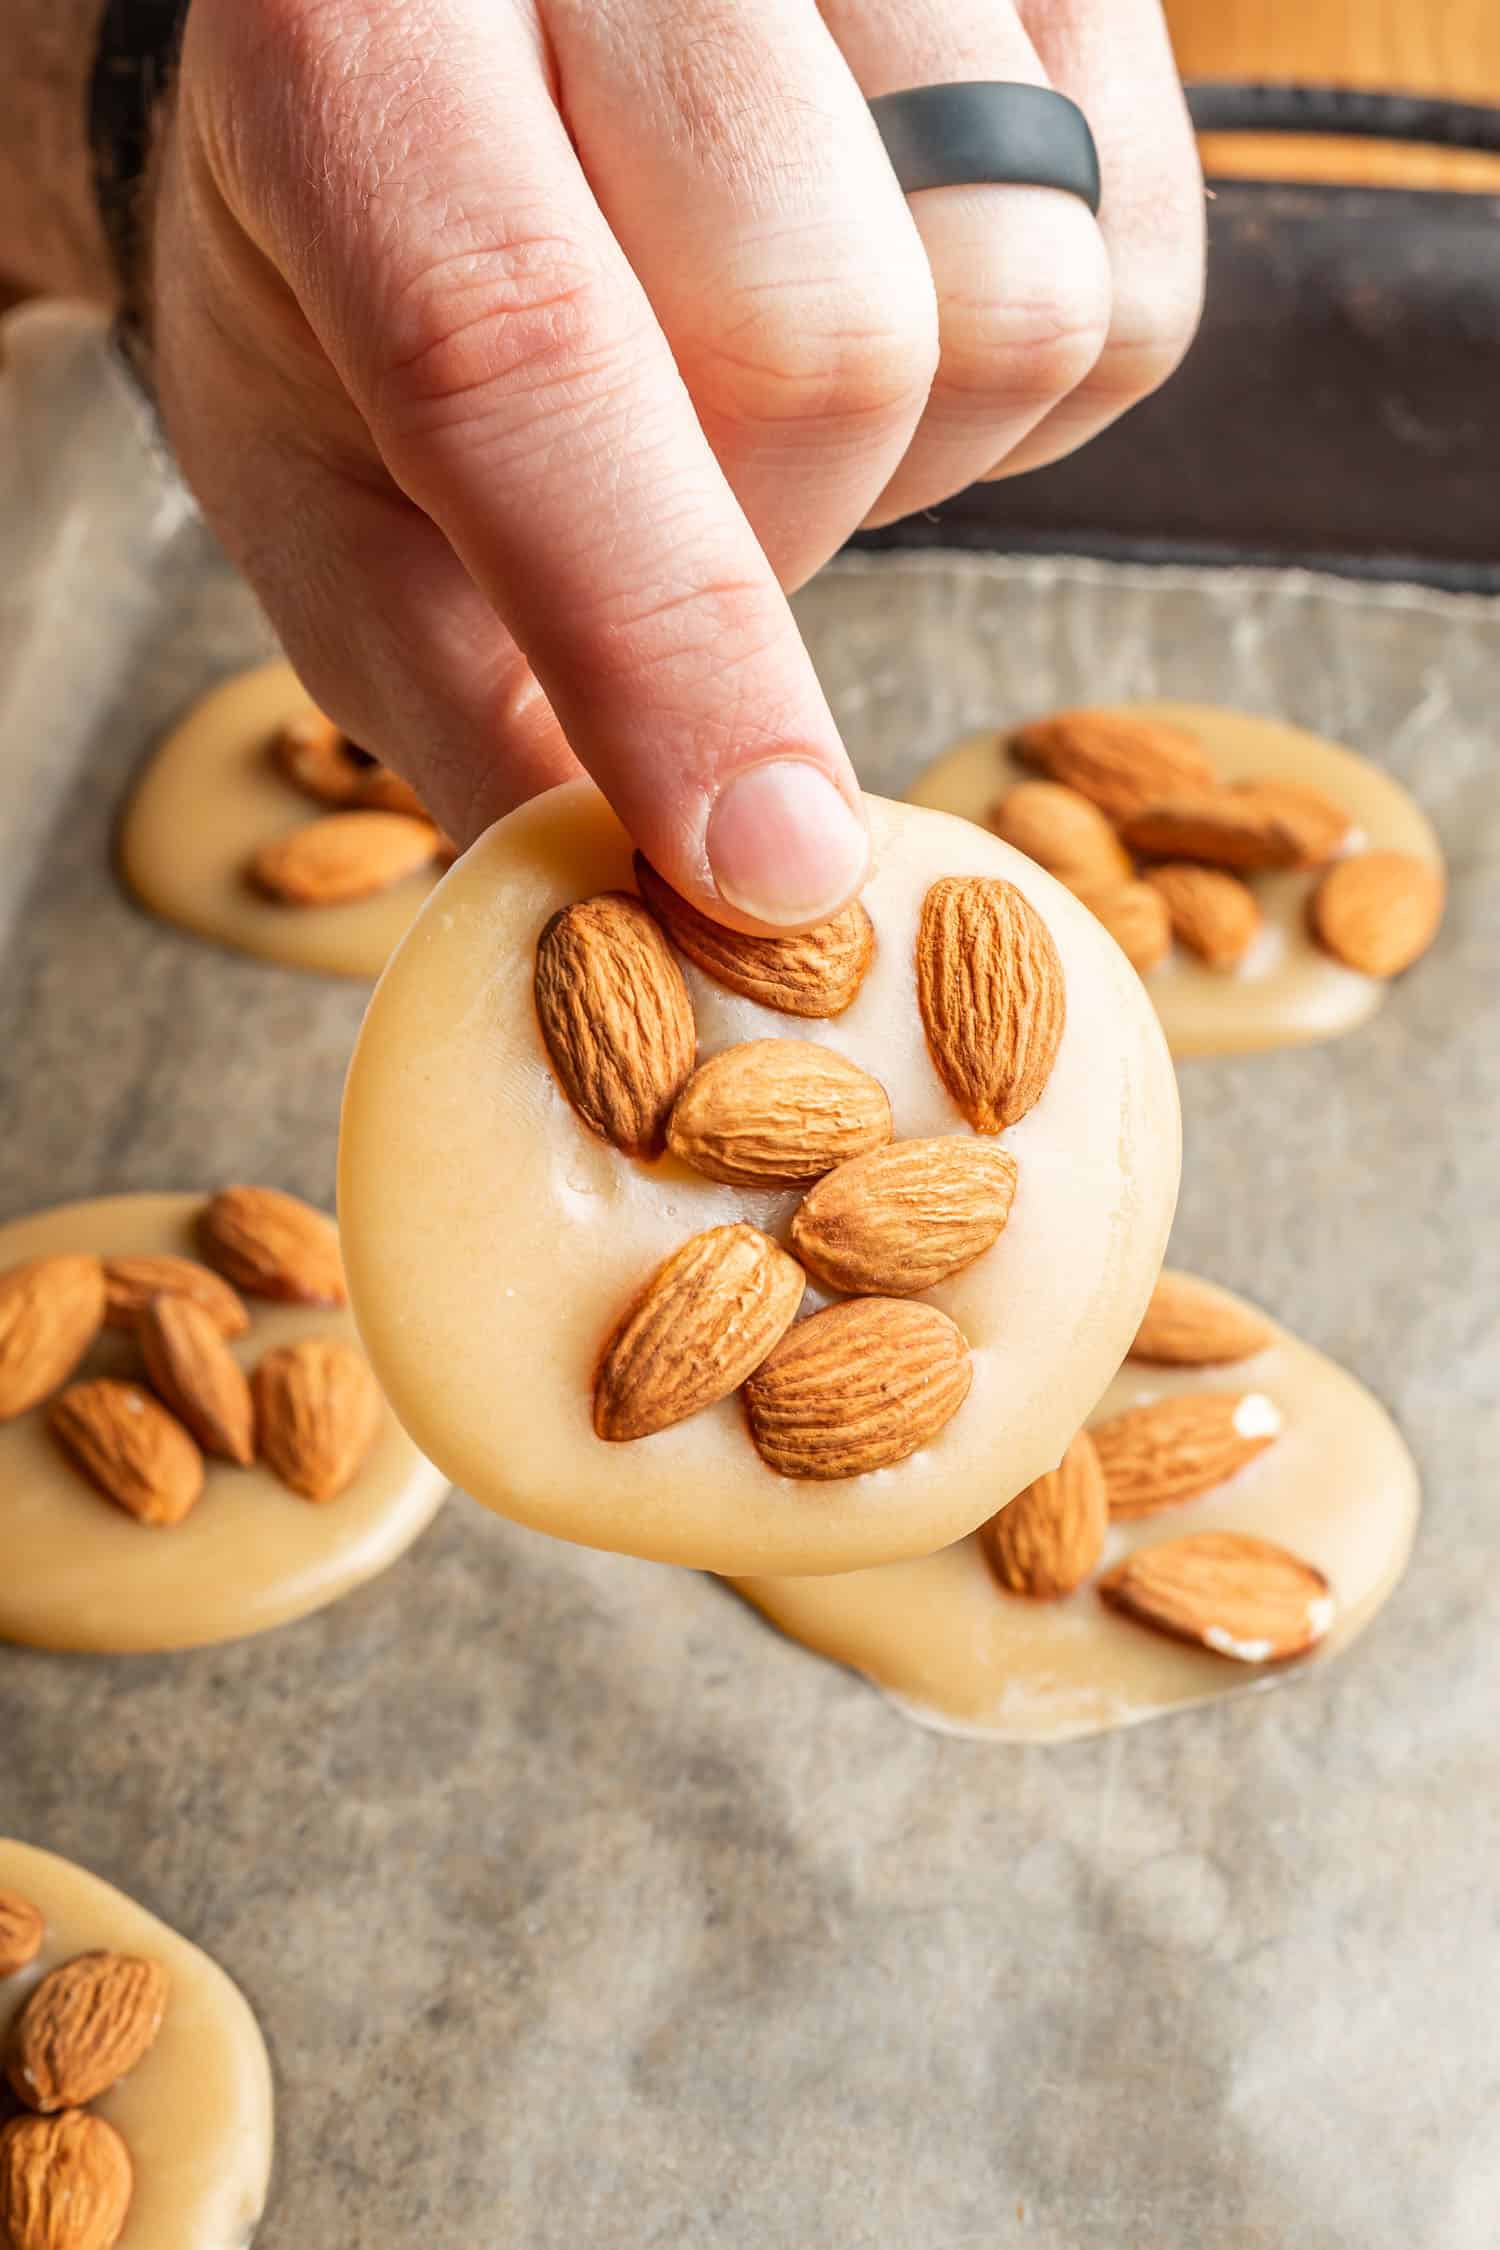 caramel almond disk being held up by a hand